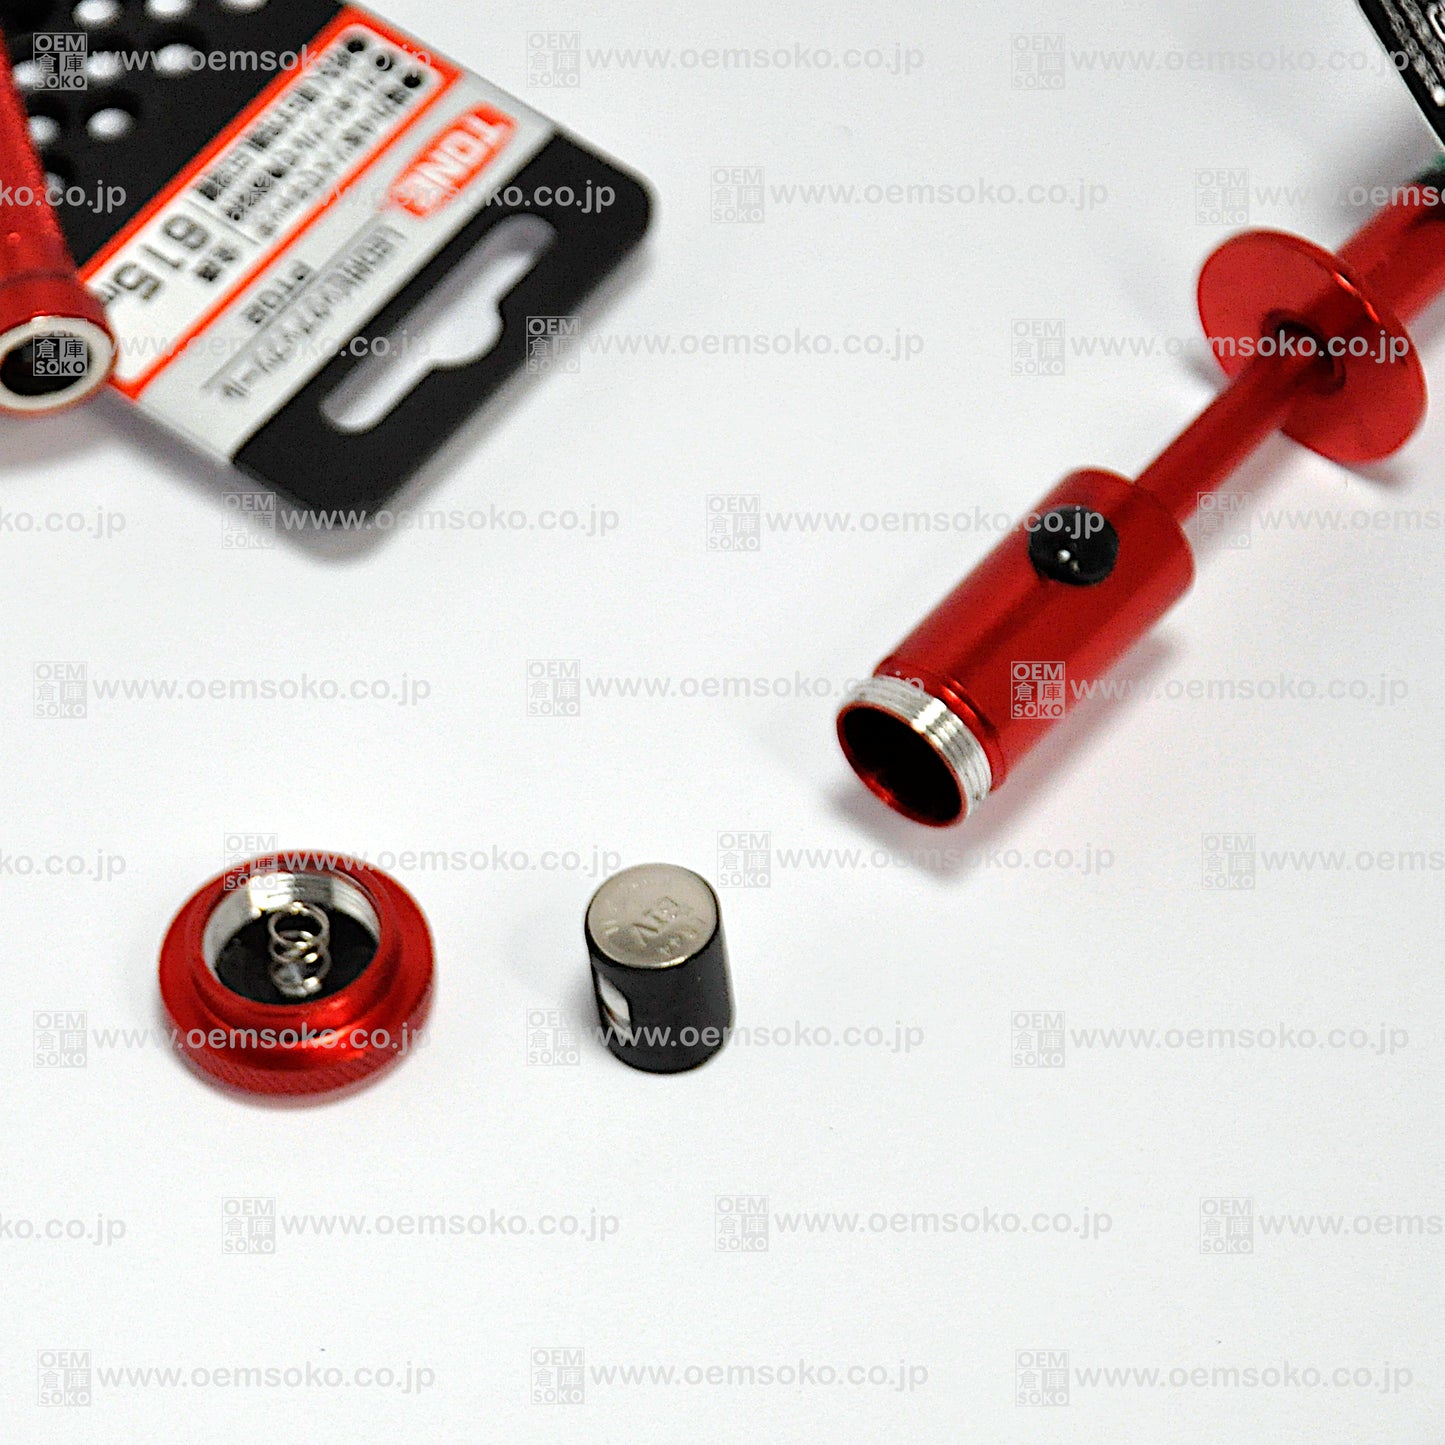 TONE Pick Up Tool with LED Light PT02